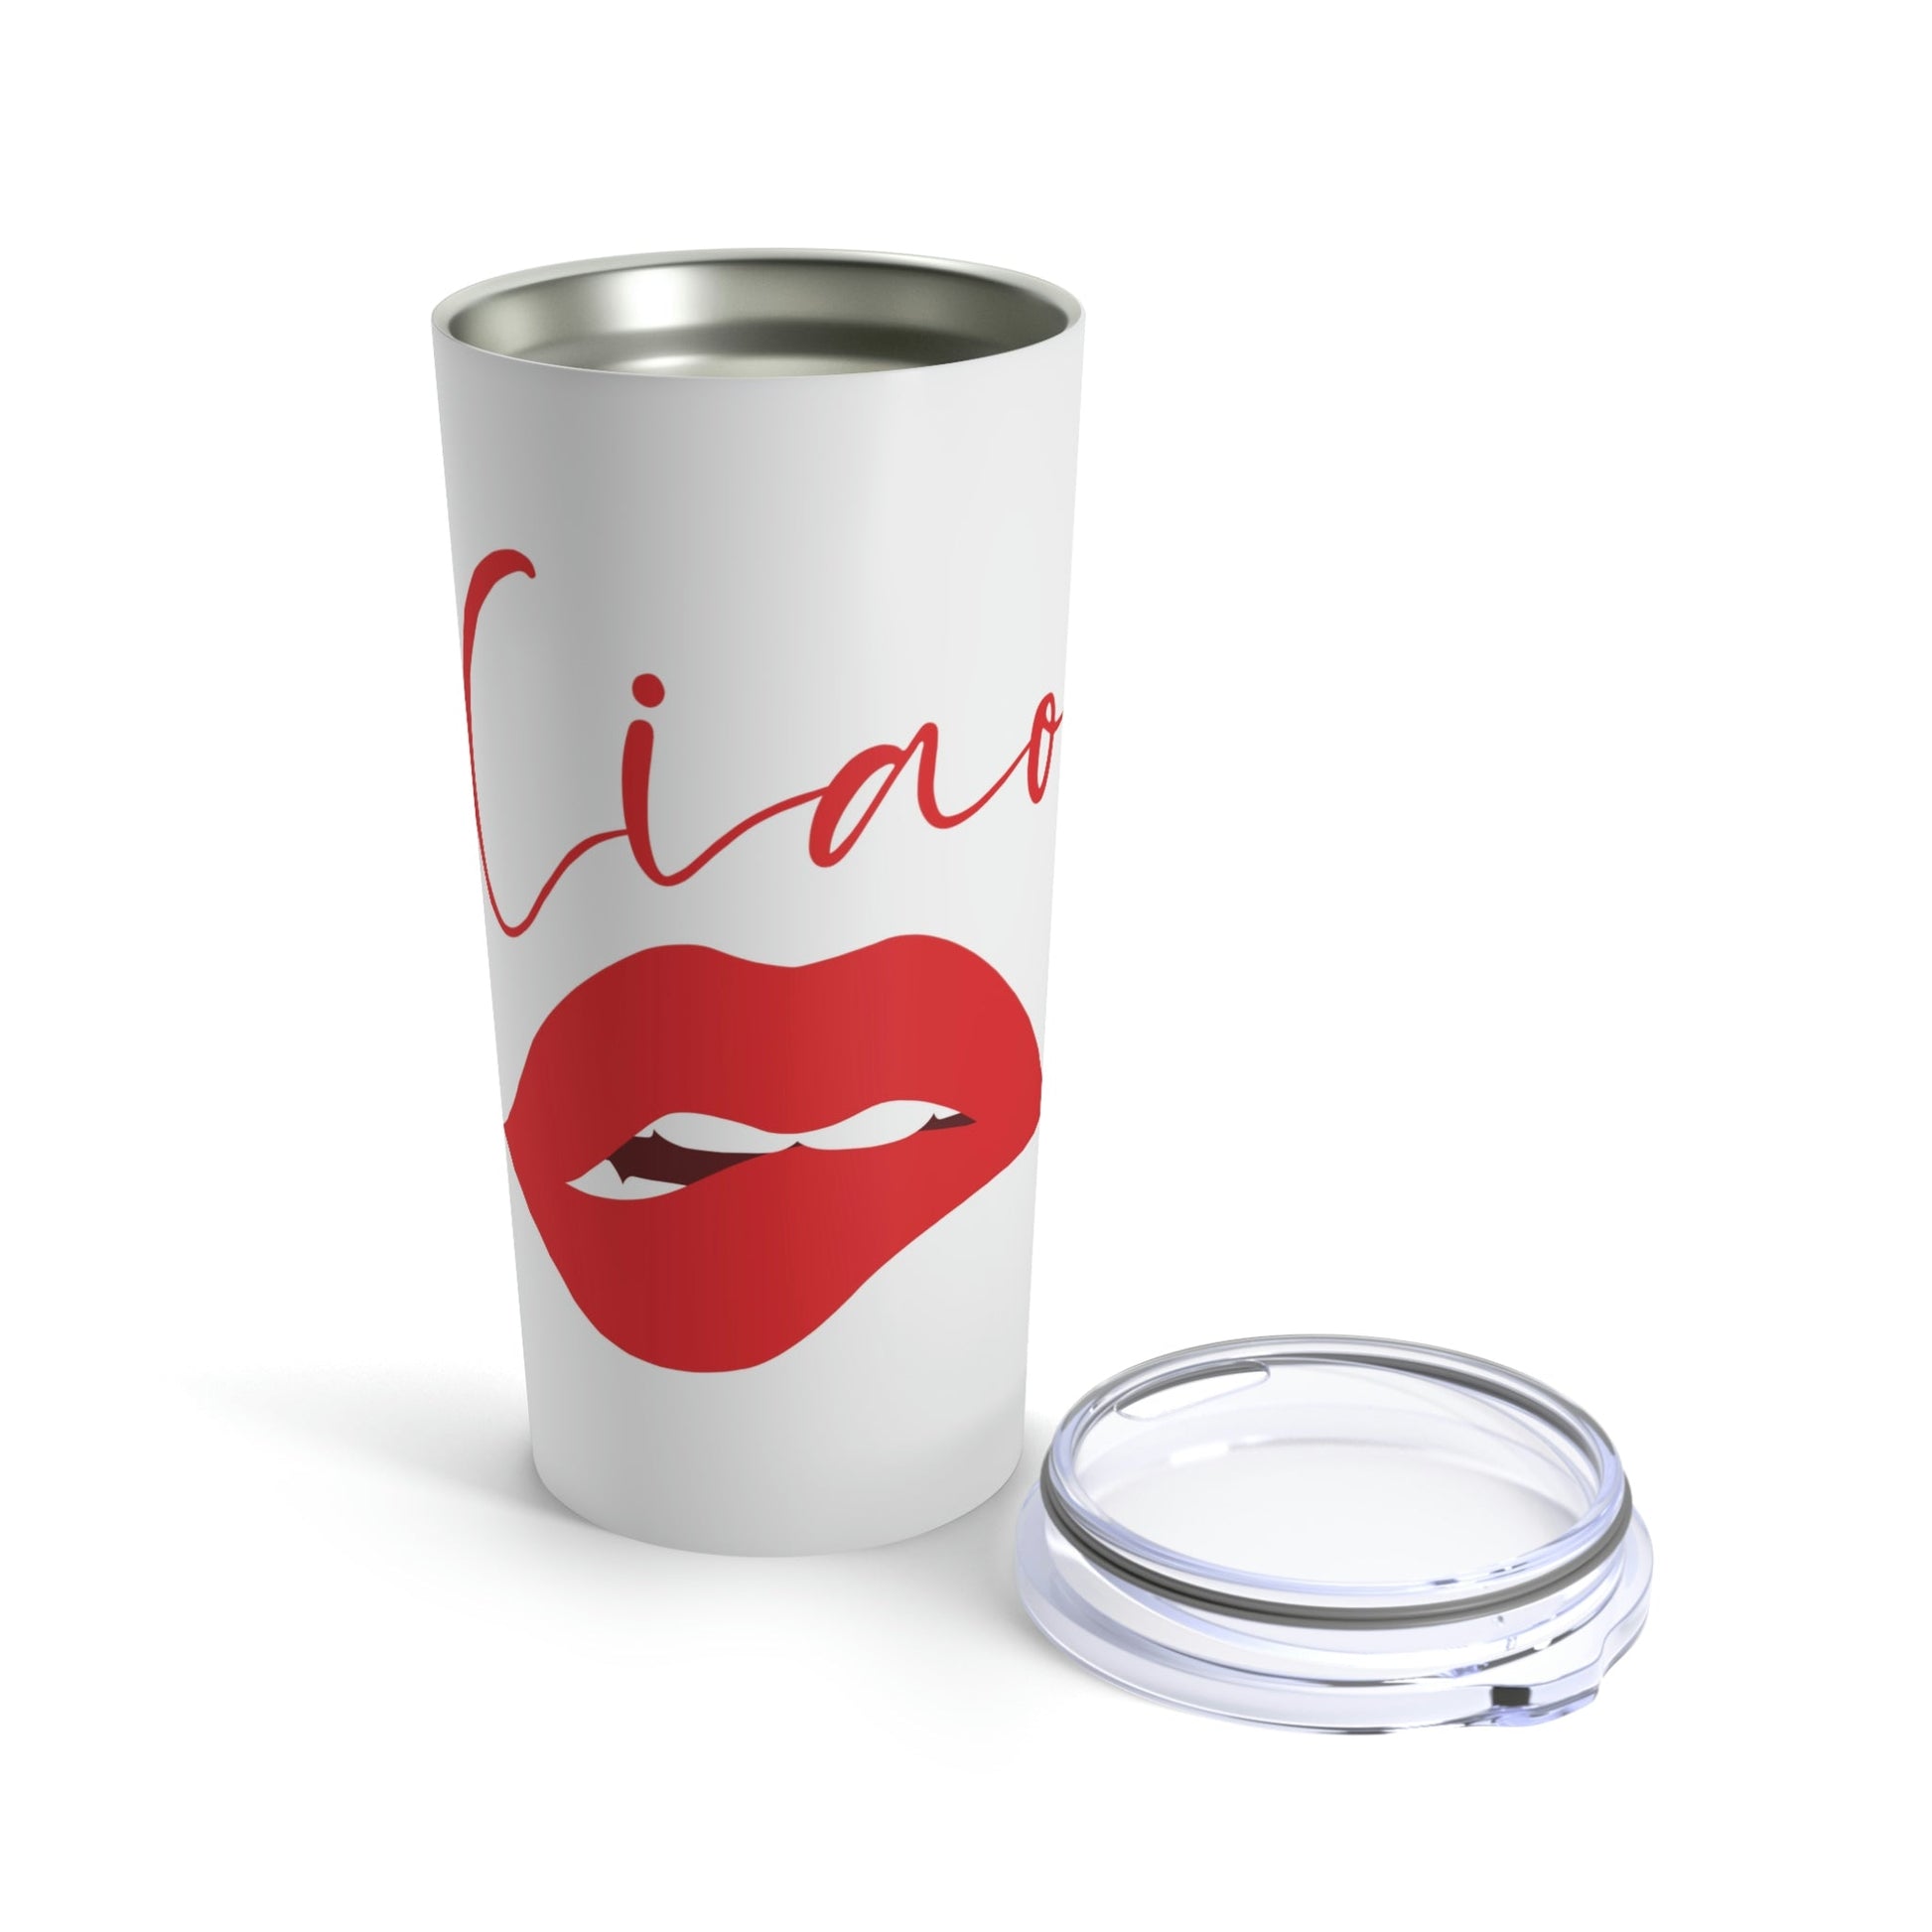 Ciao Hello Goodbye Red Lips Lipstick Lipstick Stainless Steel Hot or Cold Vacuum Tumbler 20oz Ichaku [Perfect Gifts Selection]